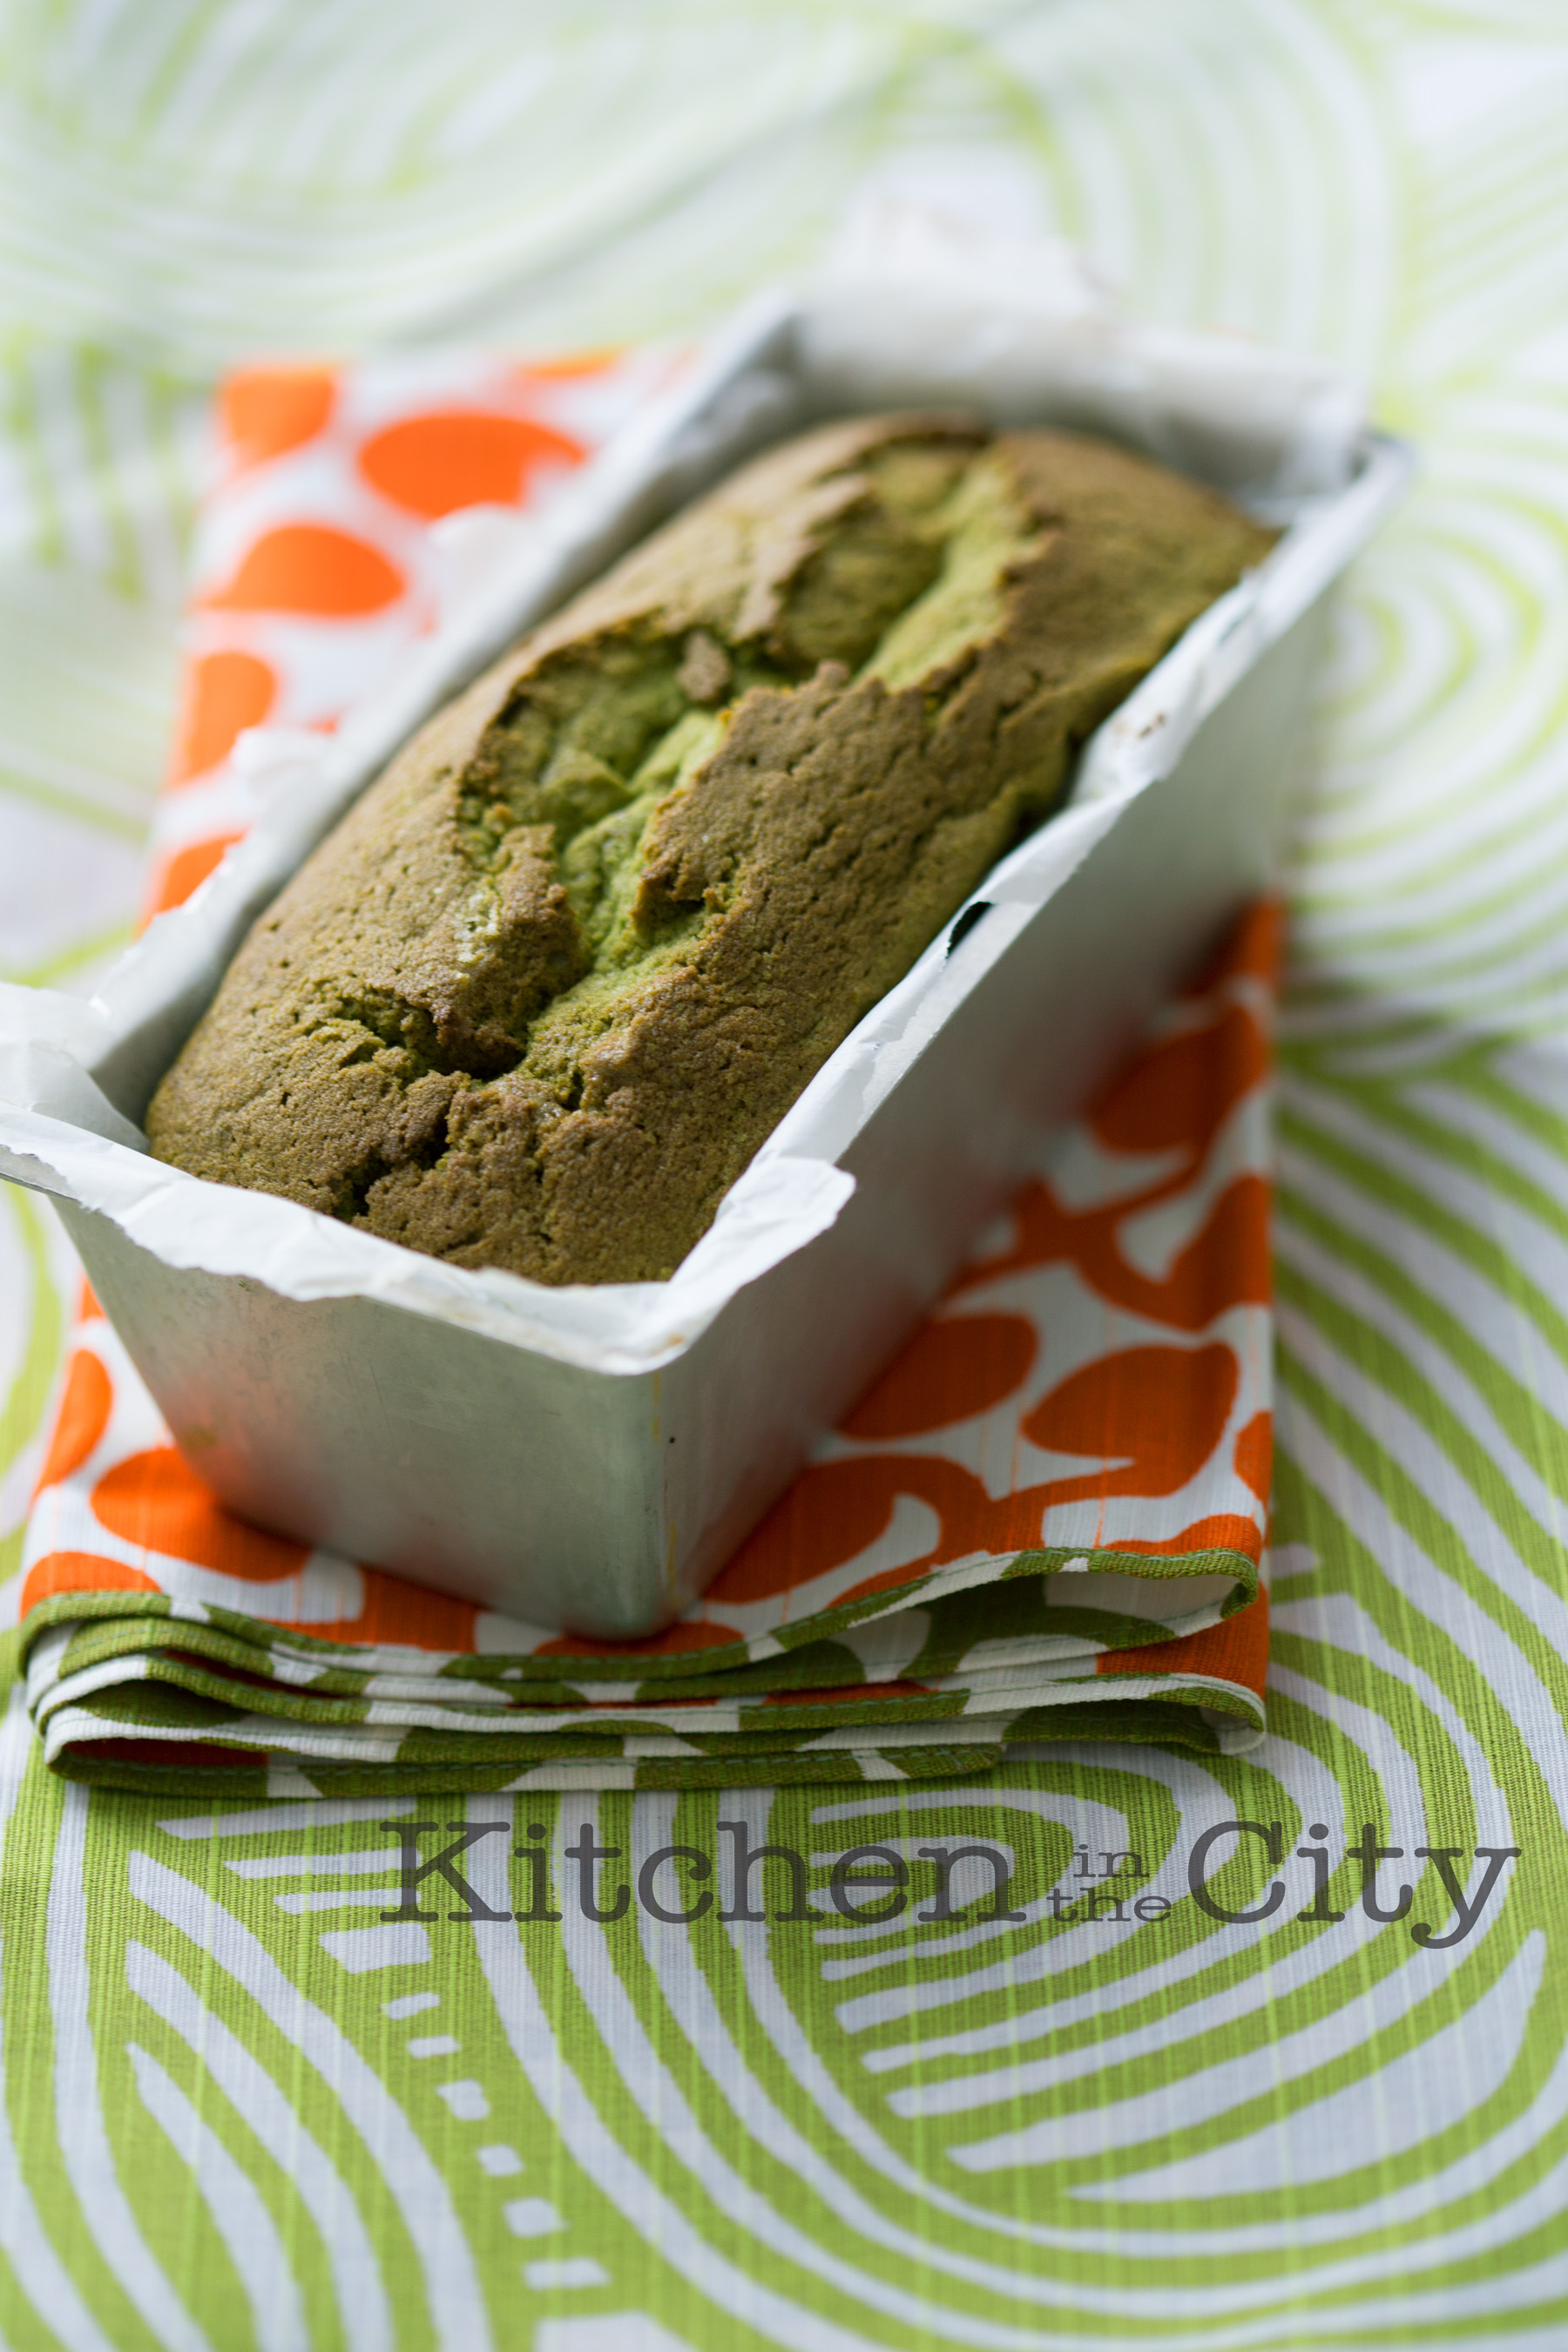 The matcha Cake Kitchen in the city